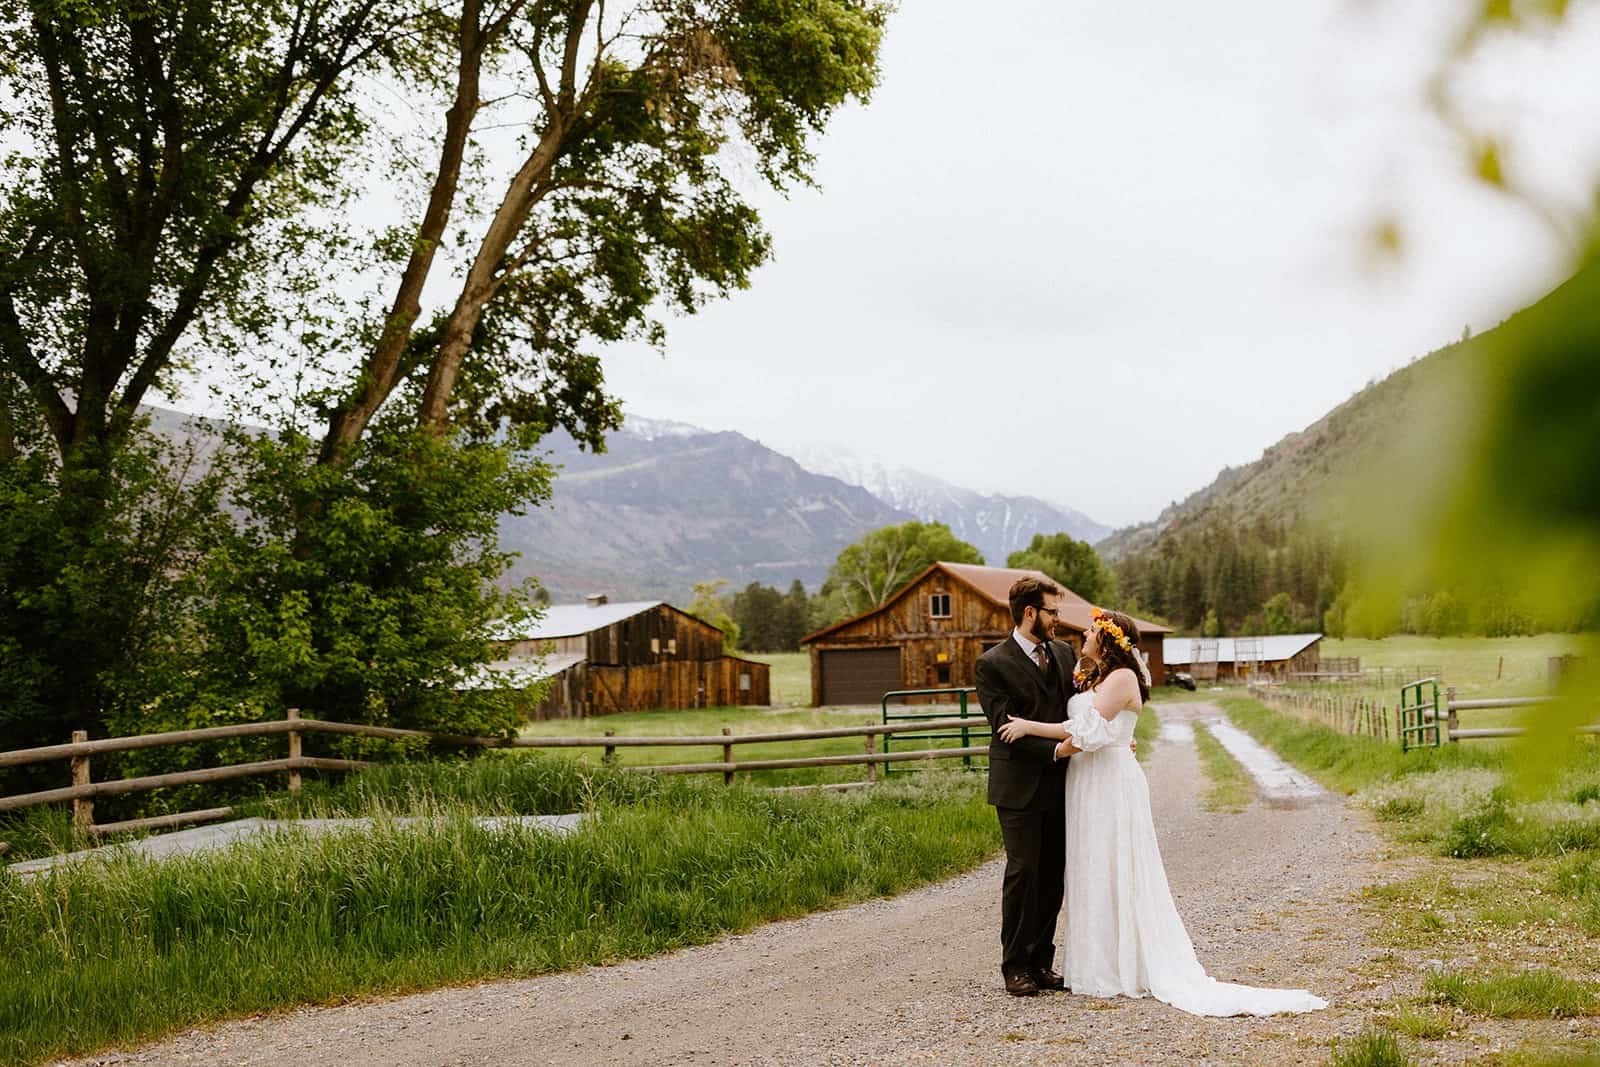 A man and woman in a wedding dress and suit embrace in front of Ouray Colorado